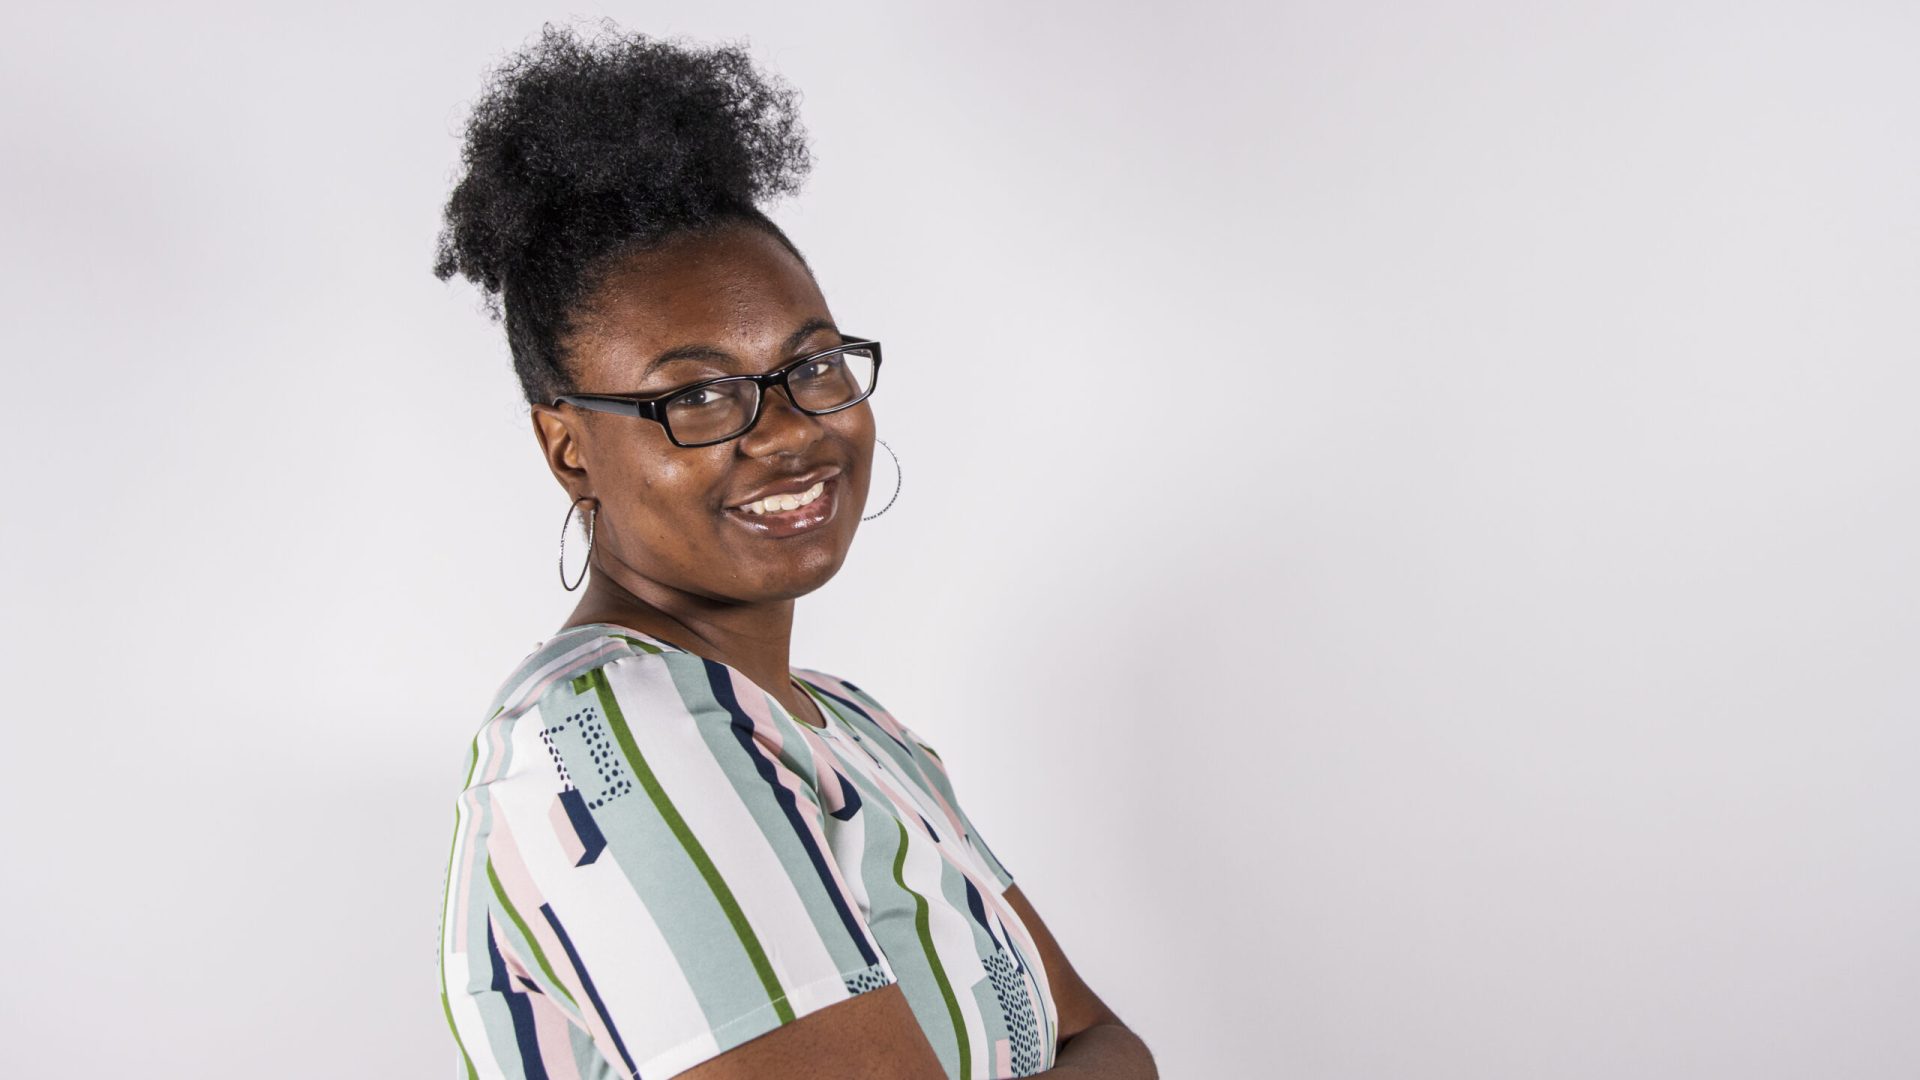 A black female college student poses for a photo in a studio